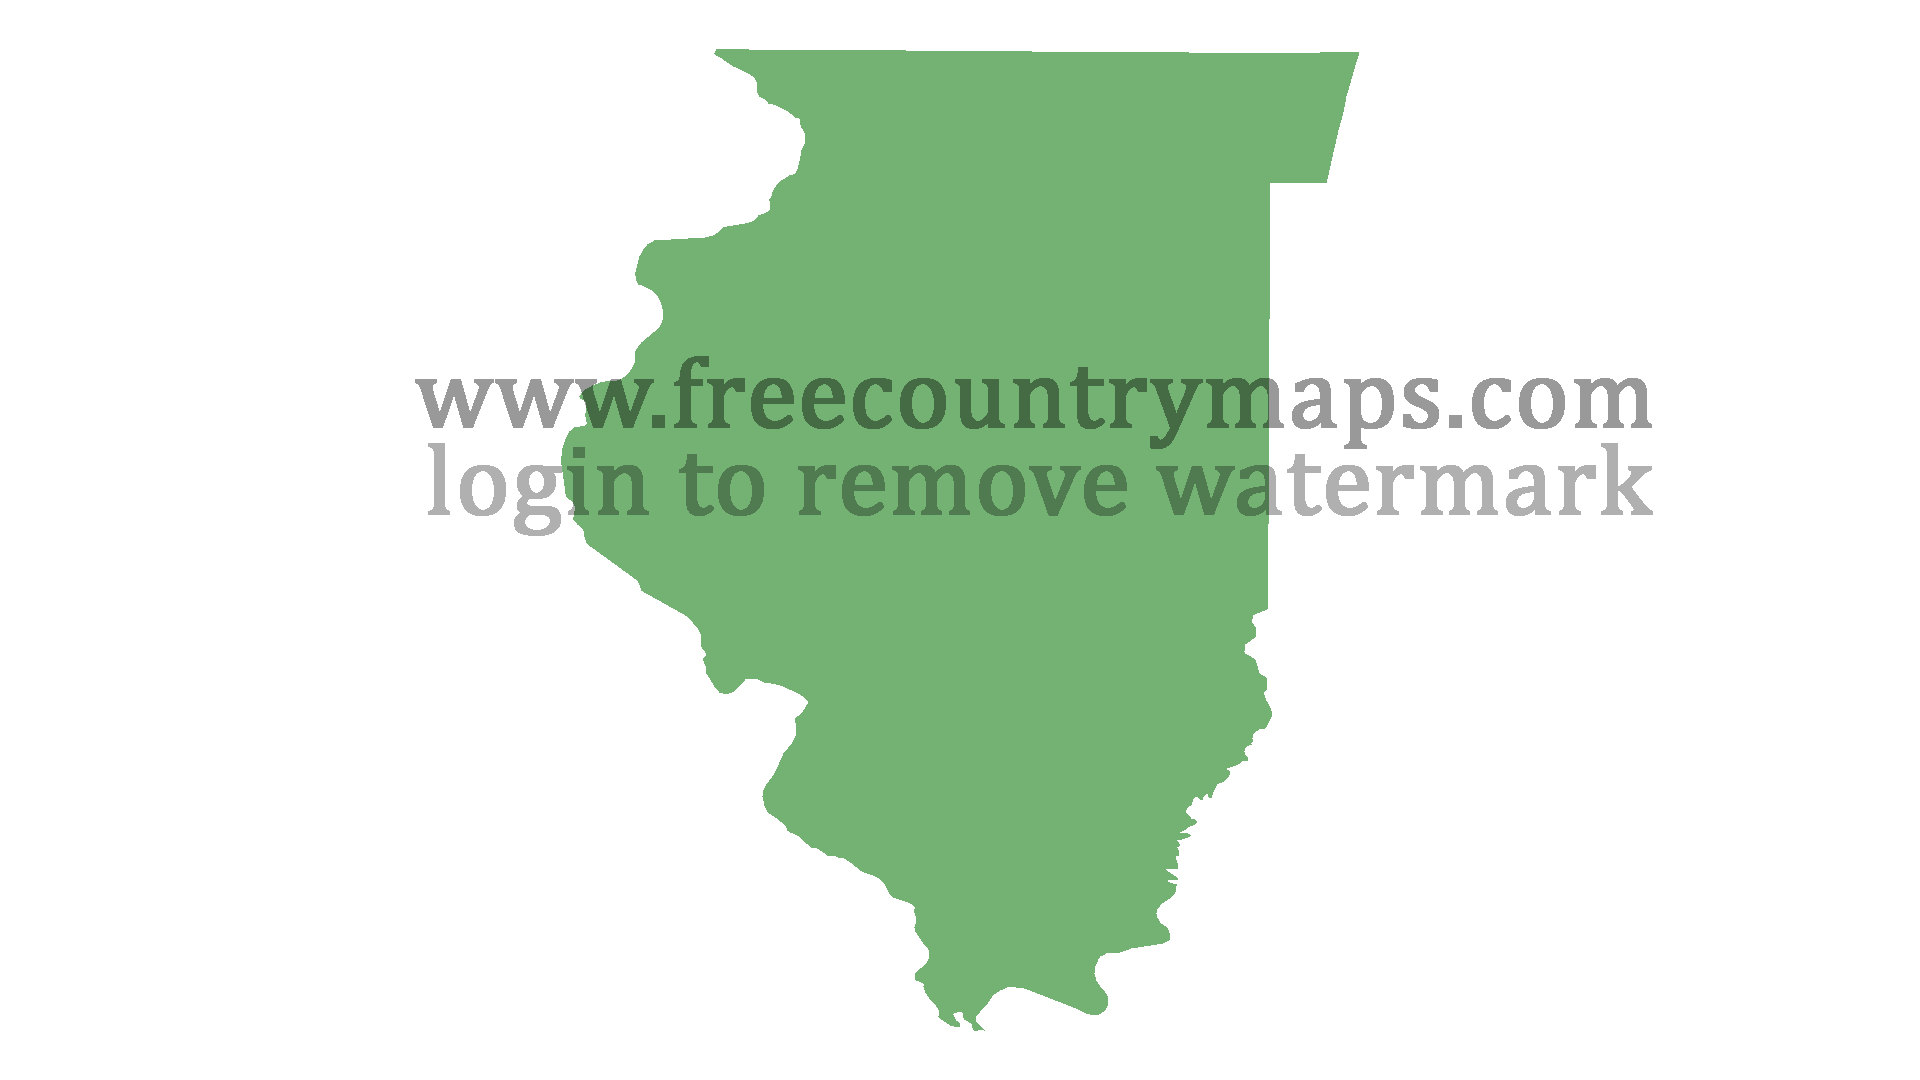 Blank Map of the State of Illinois in 1080p